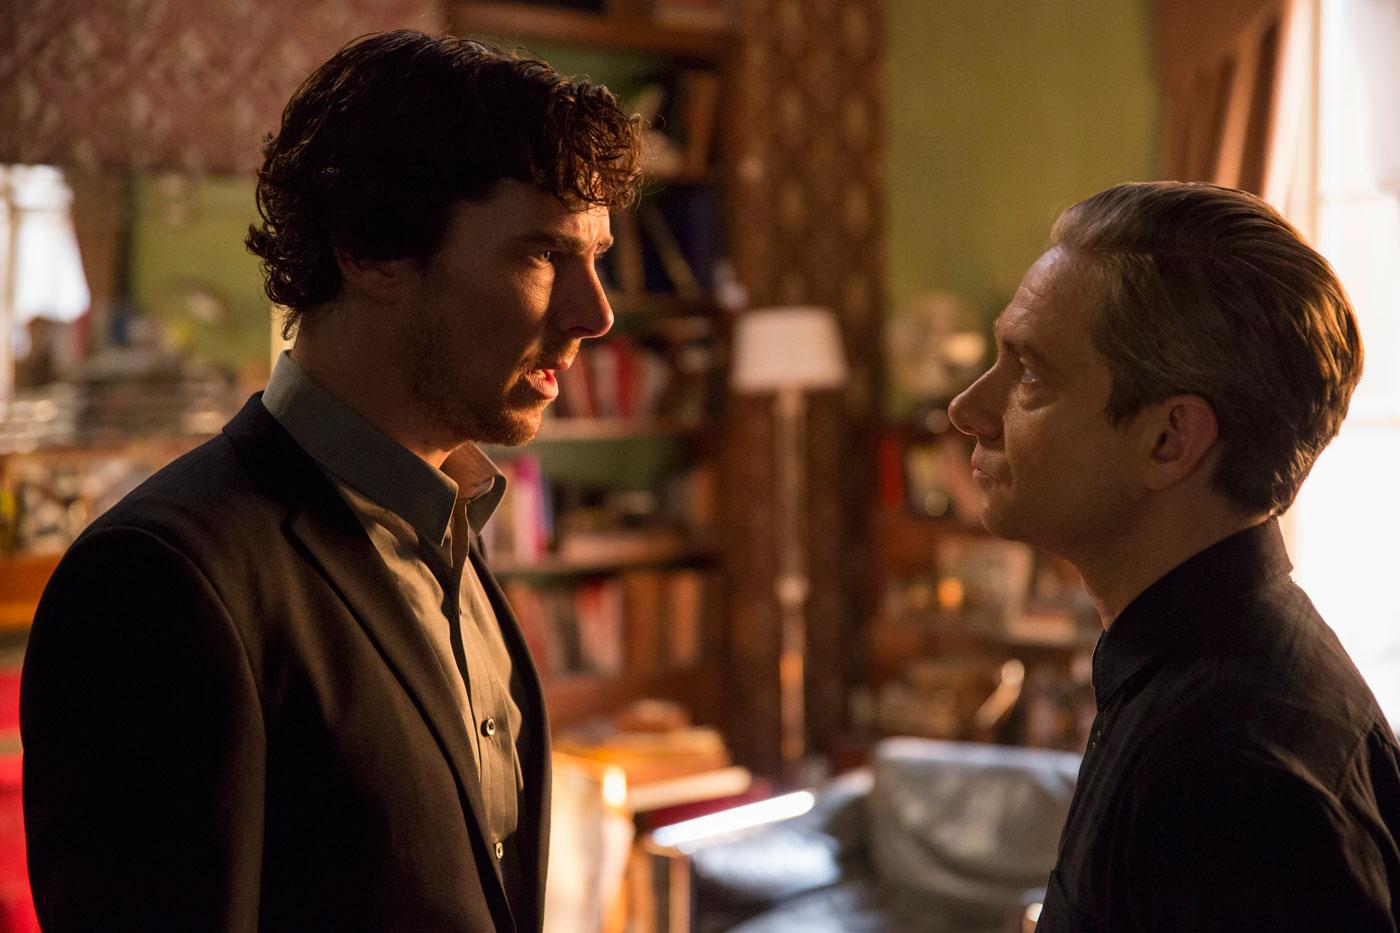 Sherlock and John bare their souls to each other, but John bears the weight of the emotional trauma.